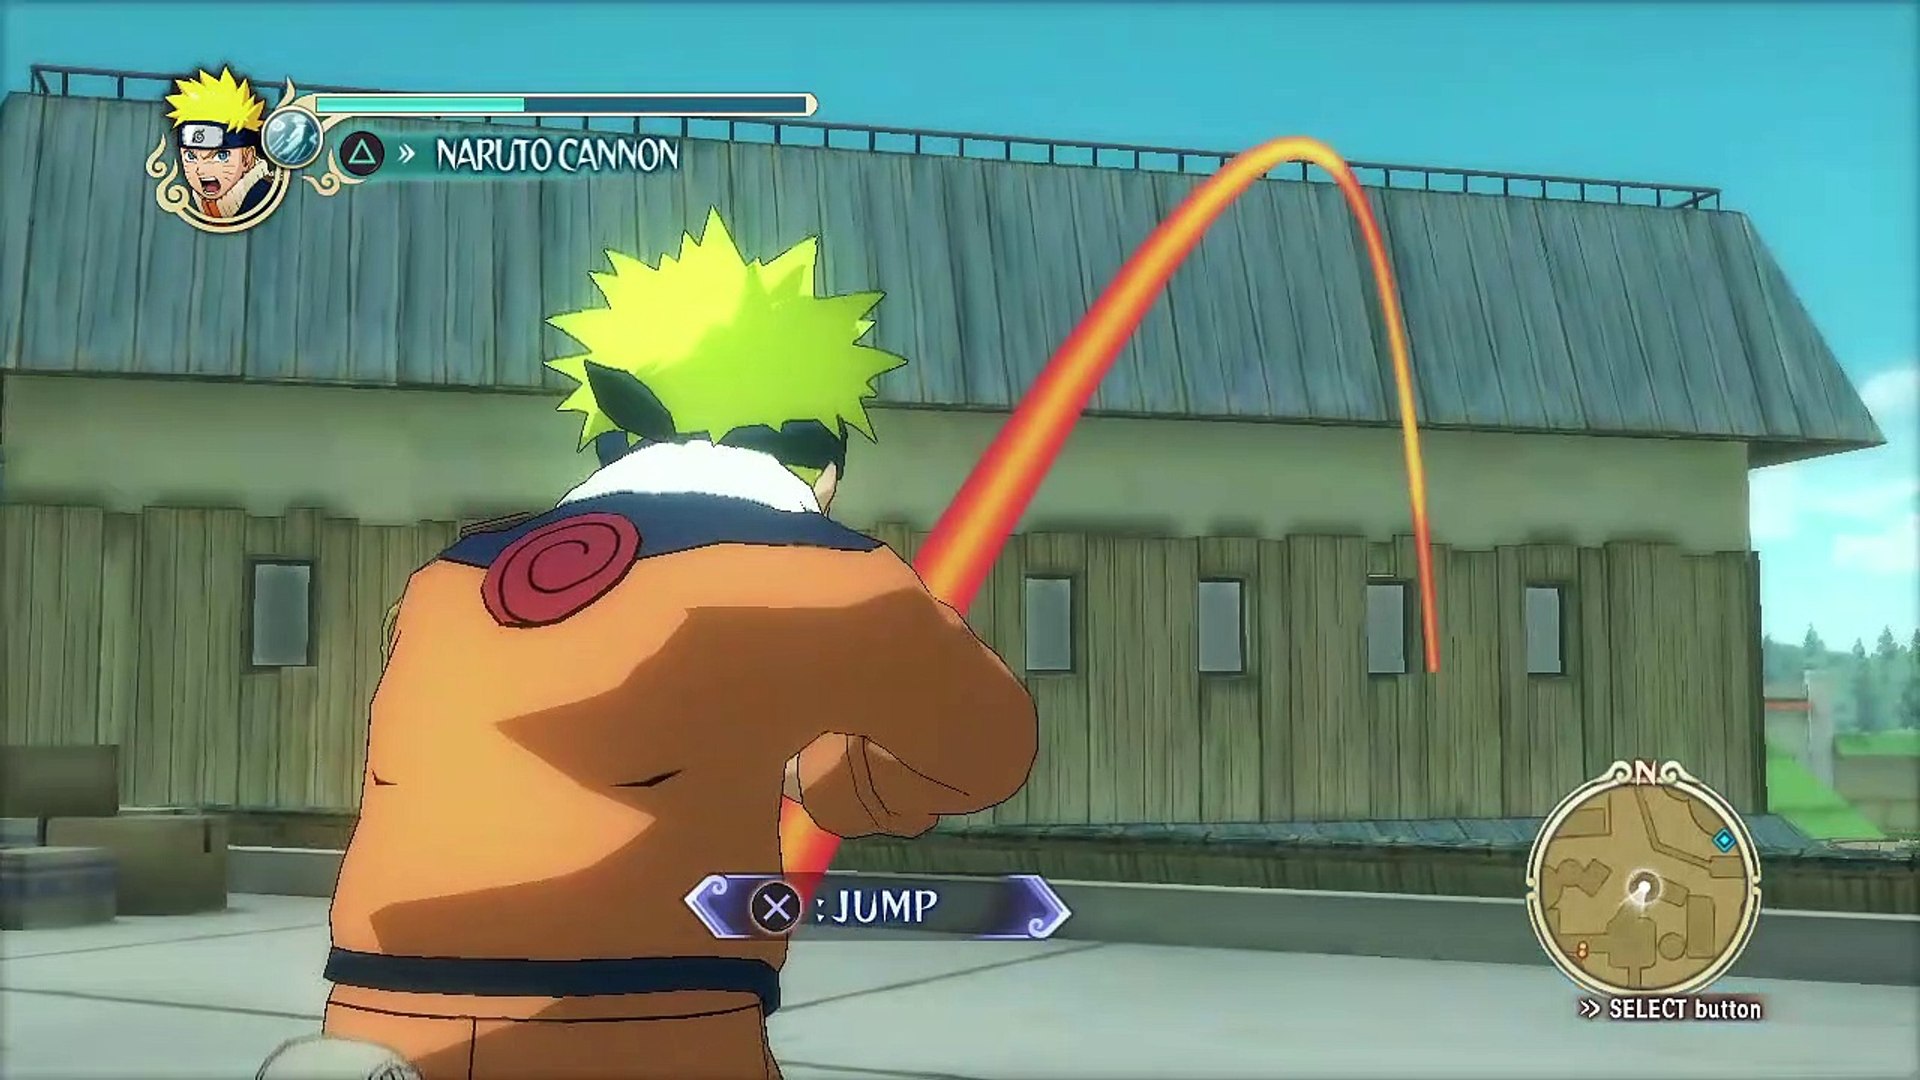 Naruto's World can be expanded into an immersive open-world experience